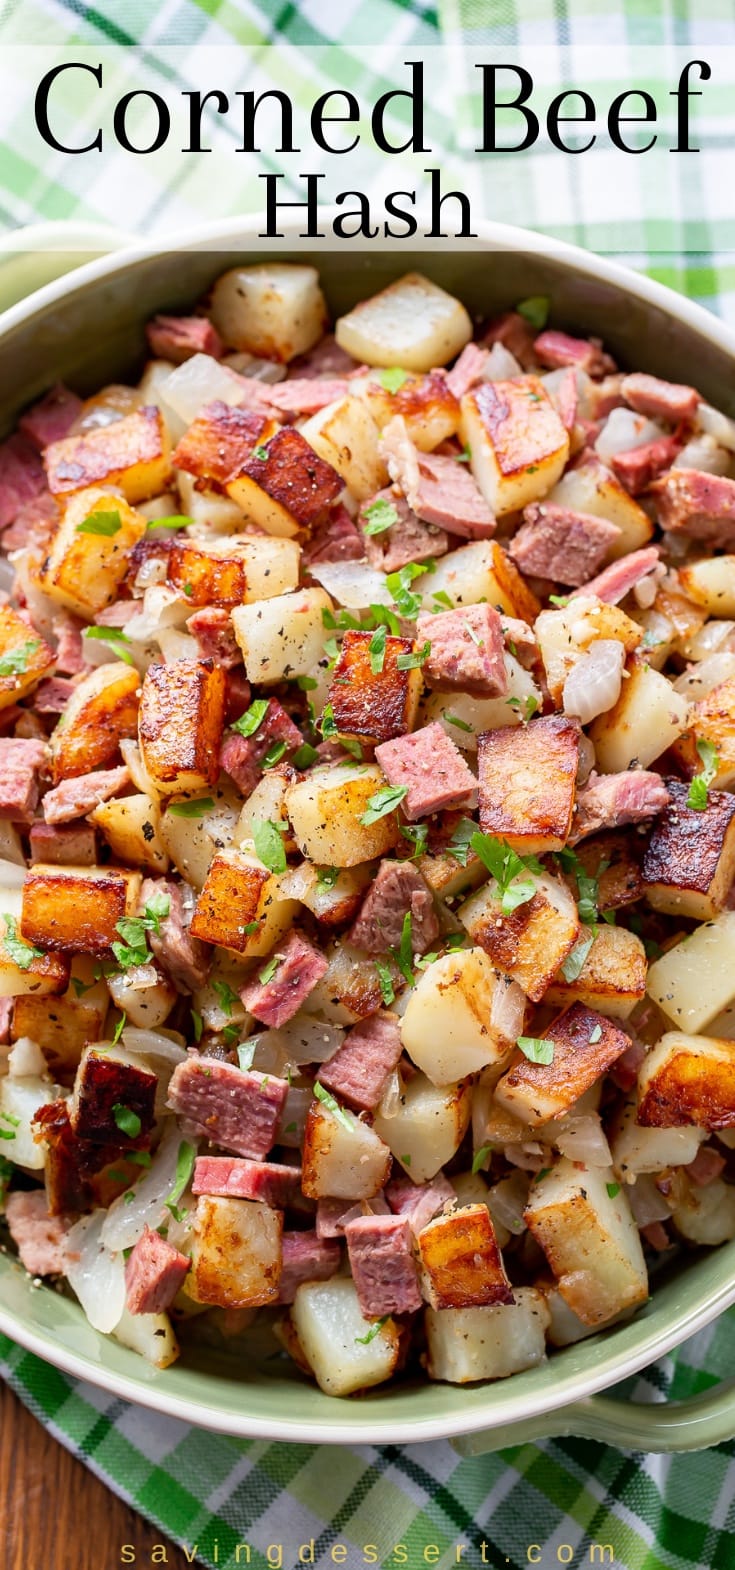 A casserole dish filled with homemade corned beef hash